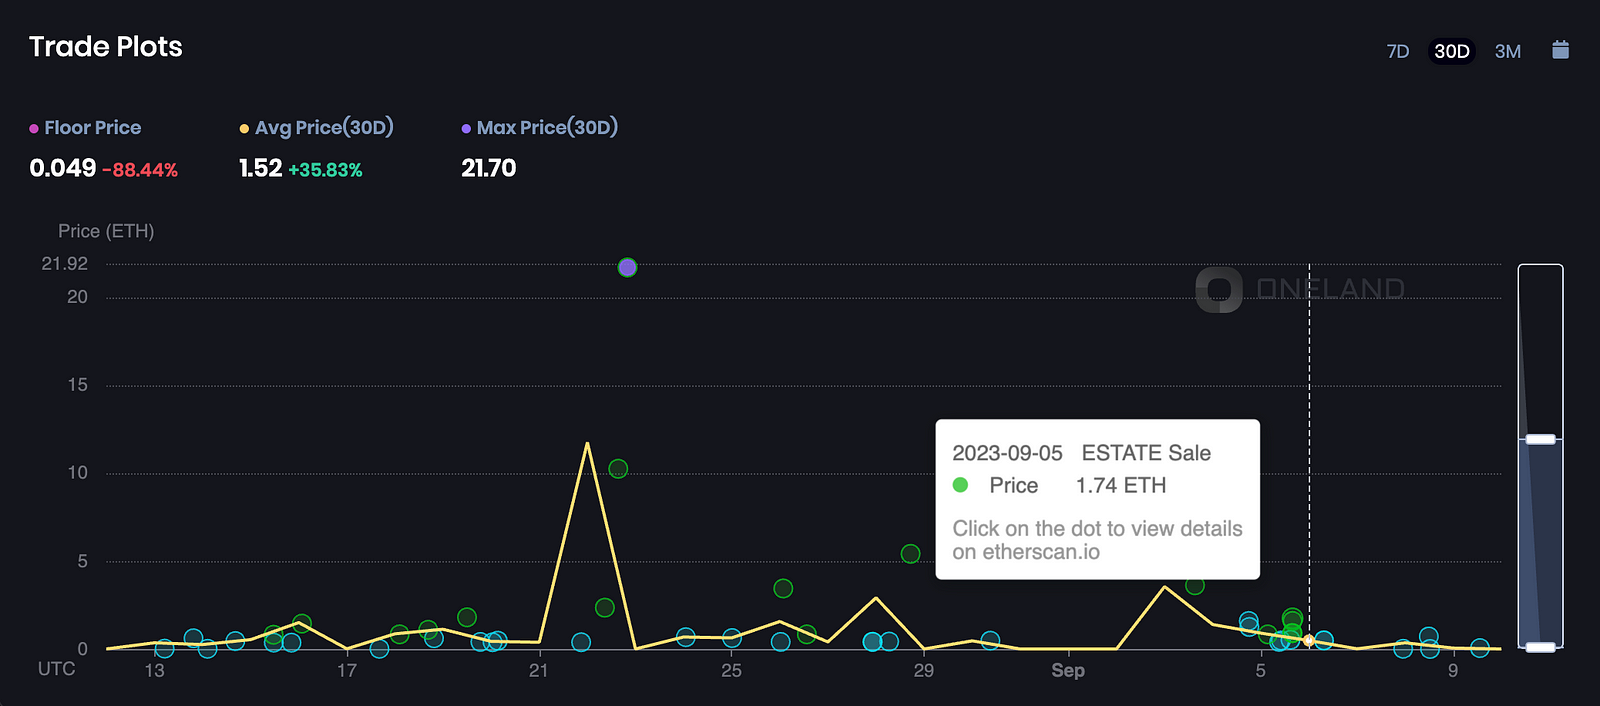 Sales were up last week at Decentraland, but sales prices were low across the board.